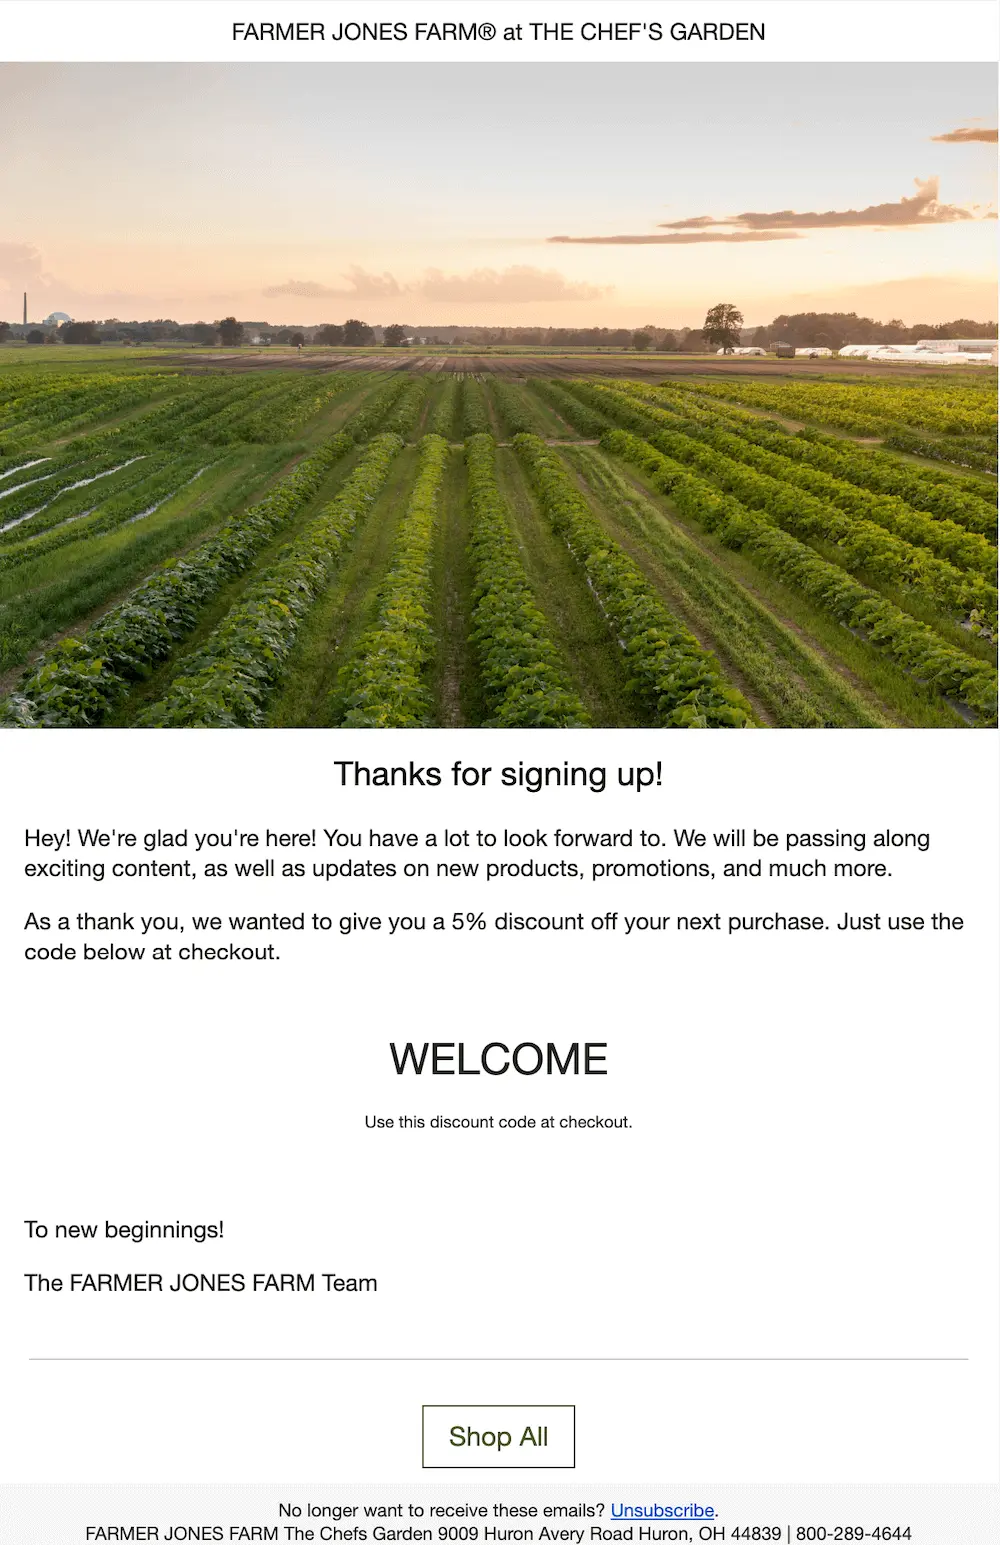 Image shows email campaigns from Farmer Jones